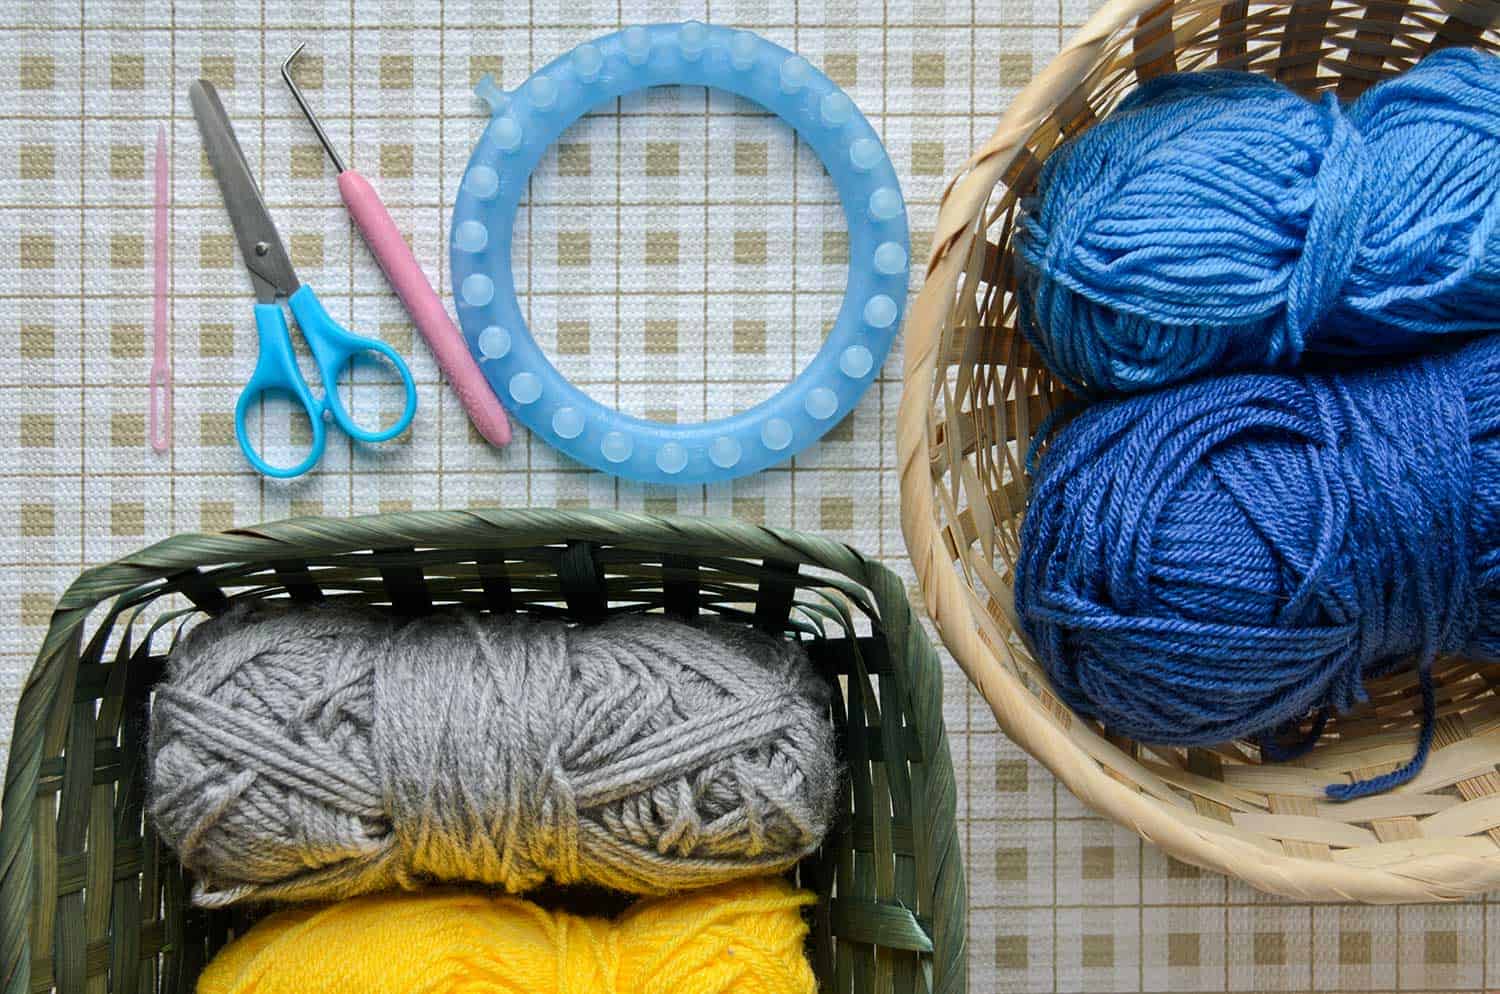 Yarns in baskets and knitting tools